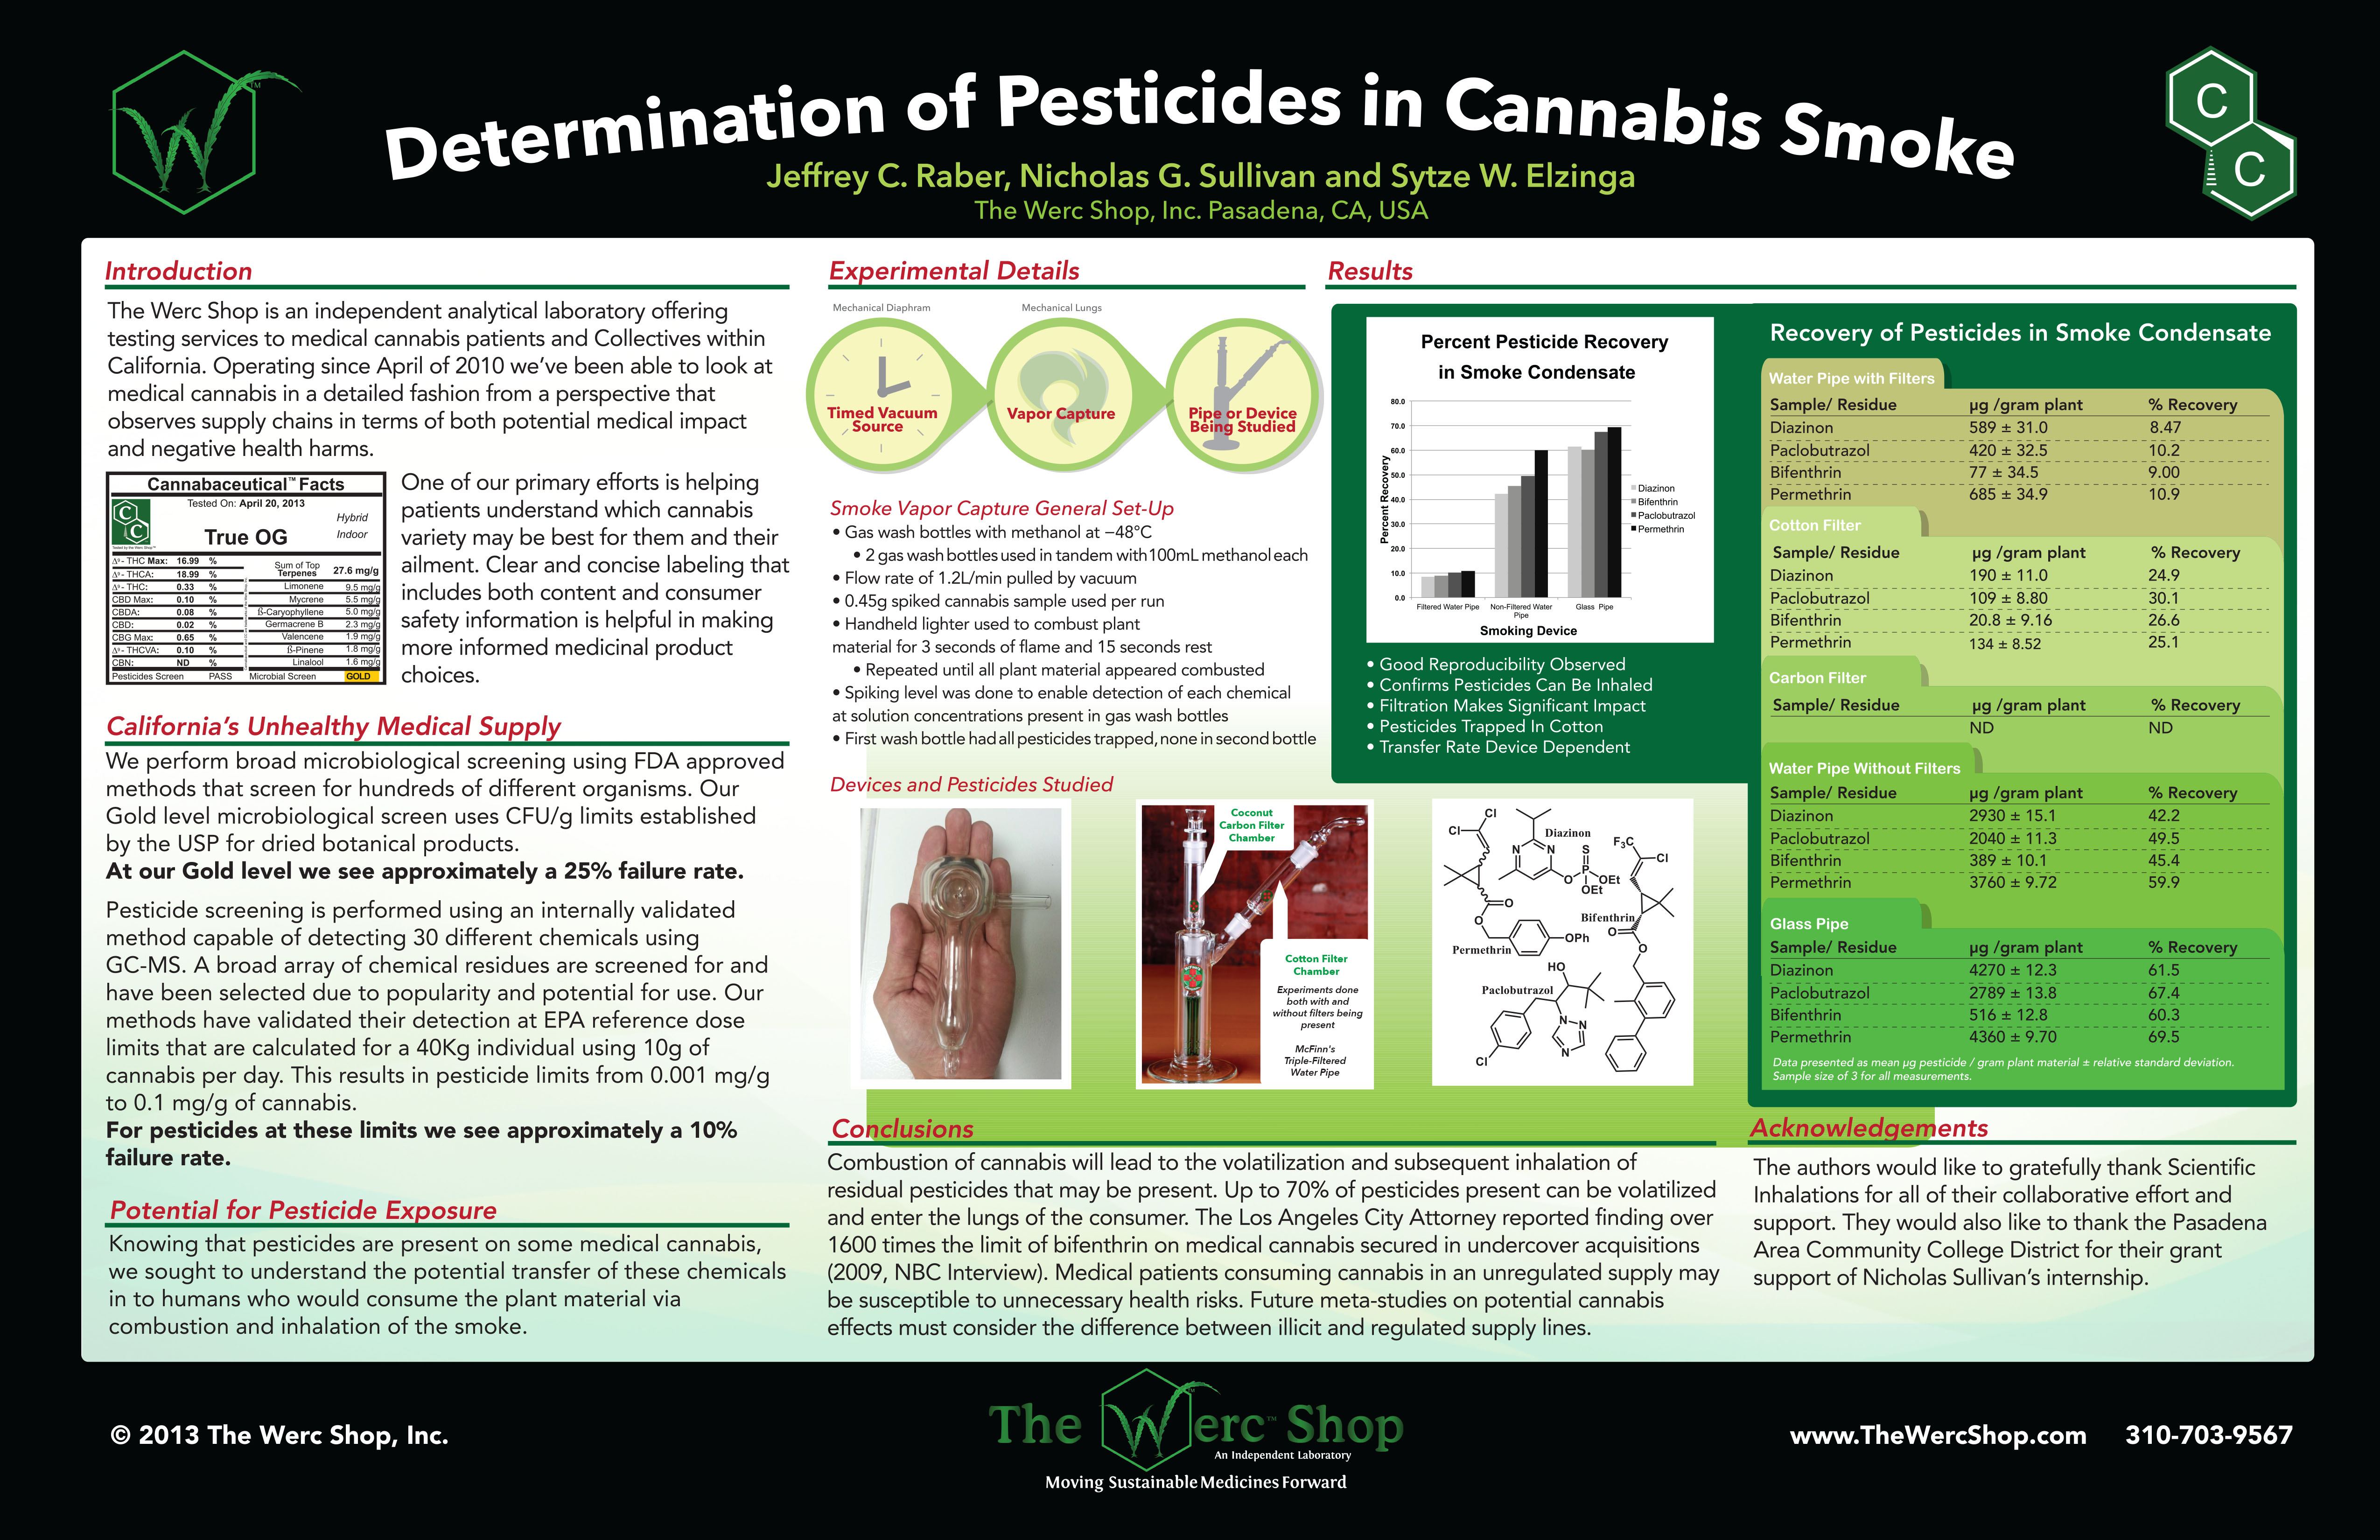 TheWercShop_Pesticide-POSTER-ICRS2013.jpg